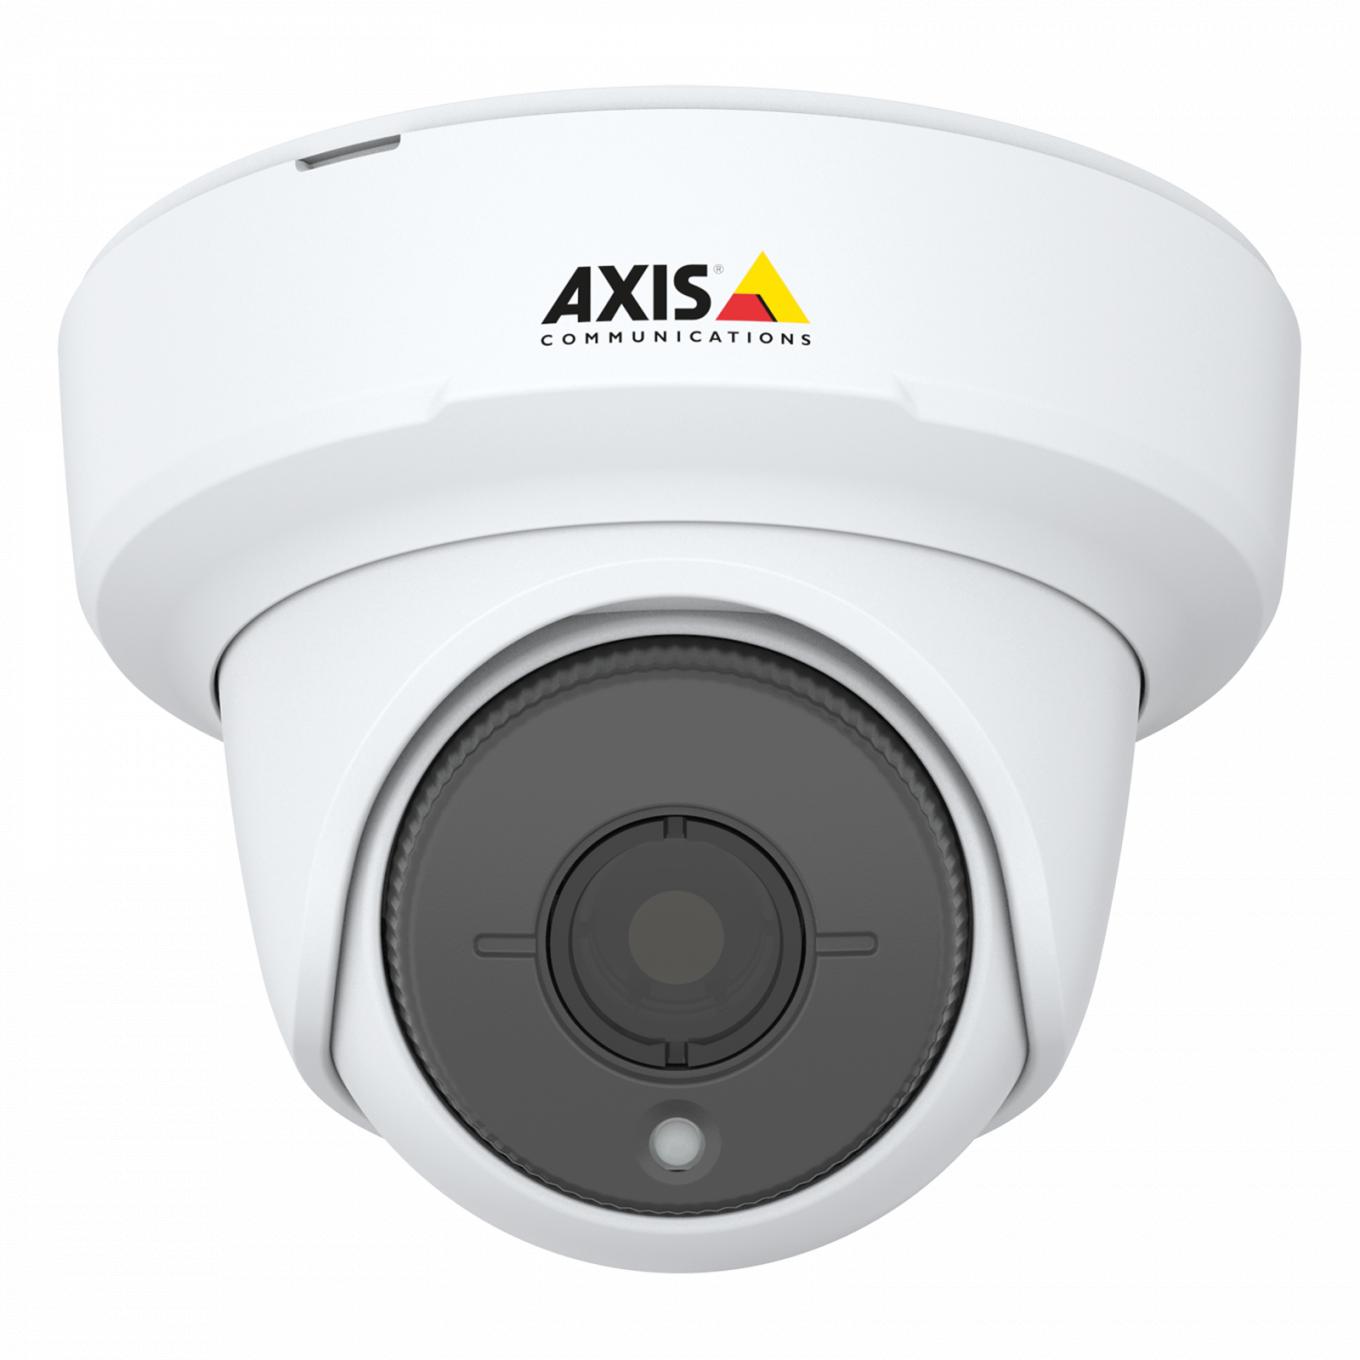 AXIS FA3105-L Eyeball Sensor Unit has Forensic WDR. The product is viewed from its front. 